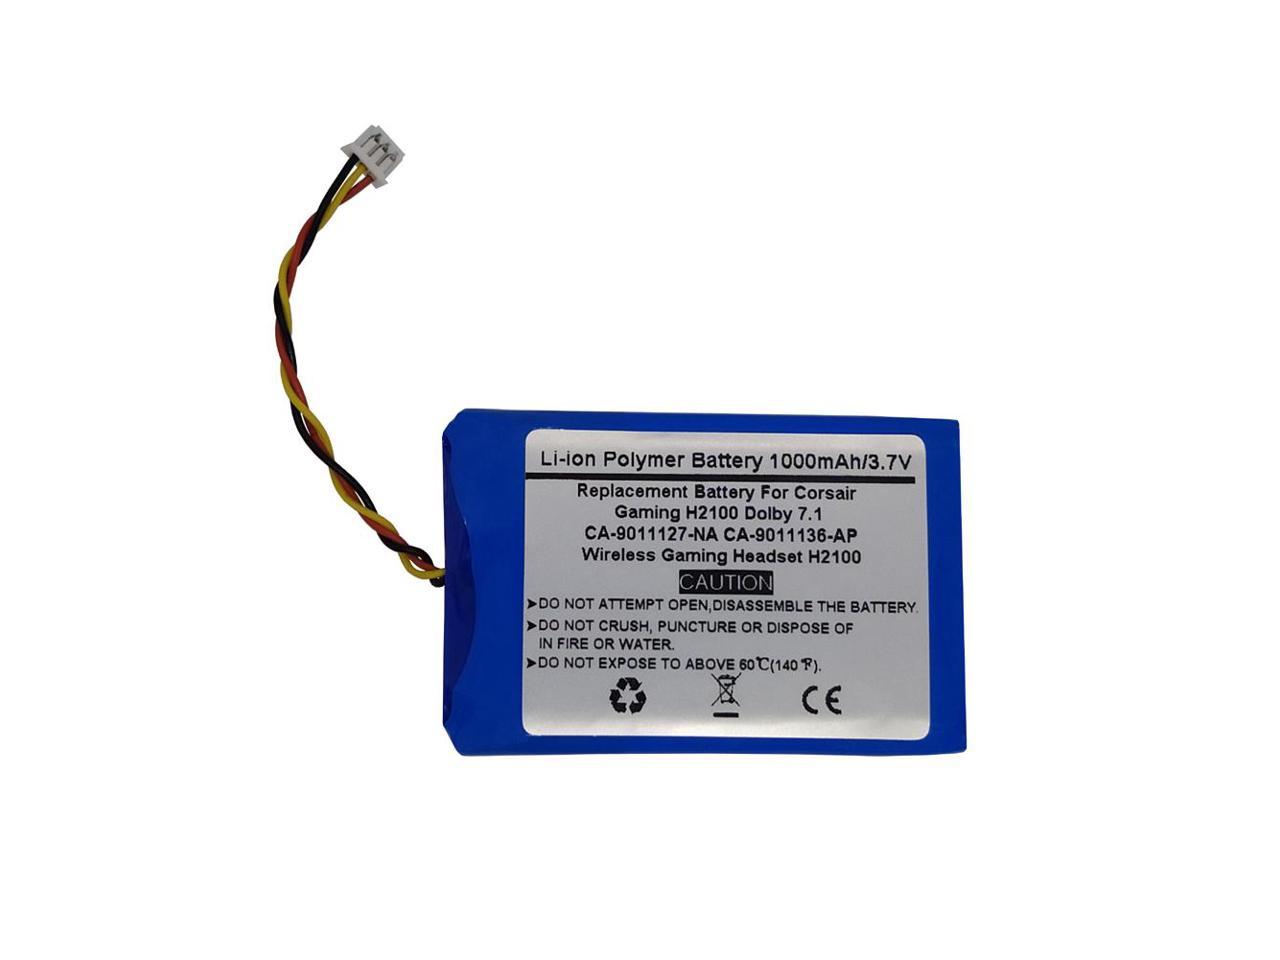 1000mAh/3.7V Replacement Battery for CA-9011127-NA CA-9011136-AP H2100 Dolby 7.1 Wireless Headset PN MH45908 - Newegg.com